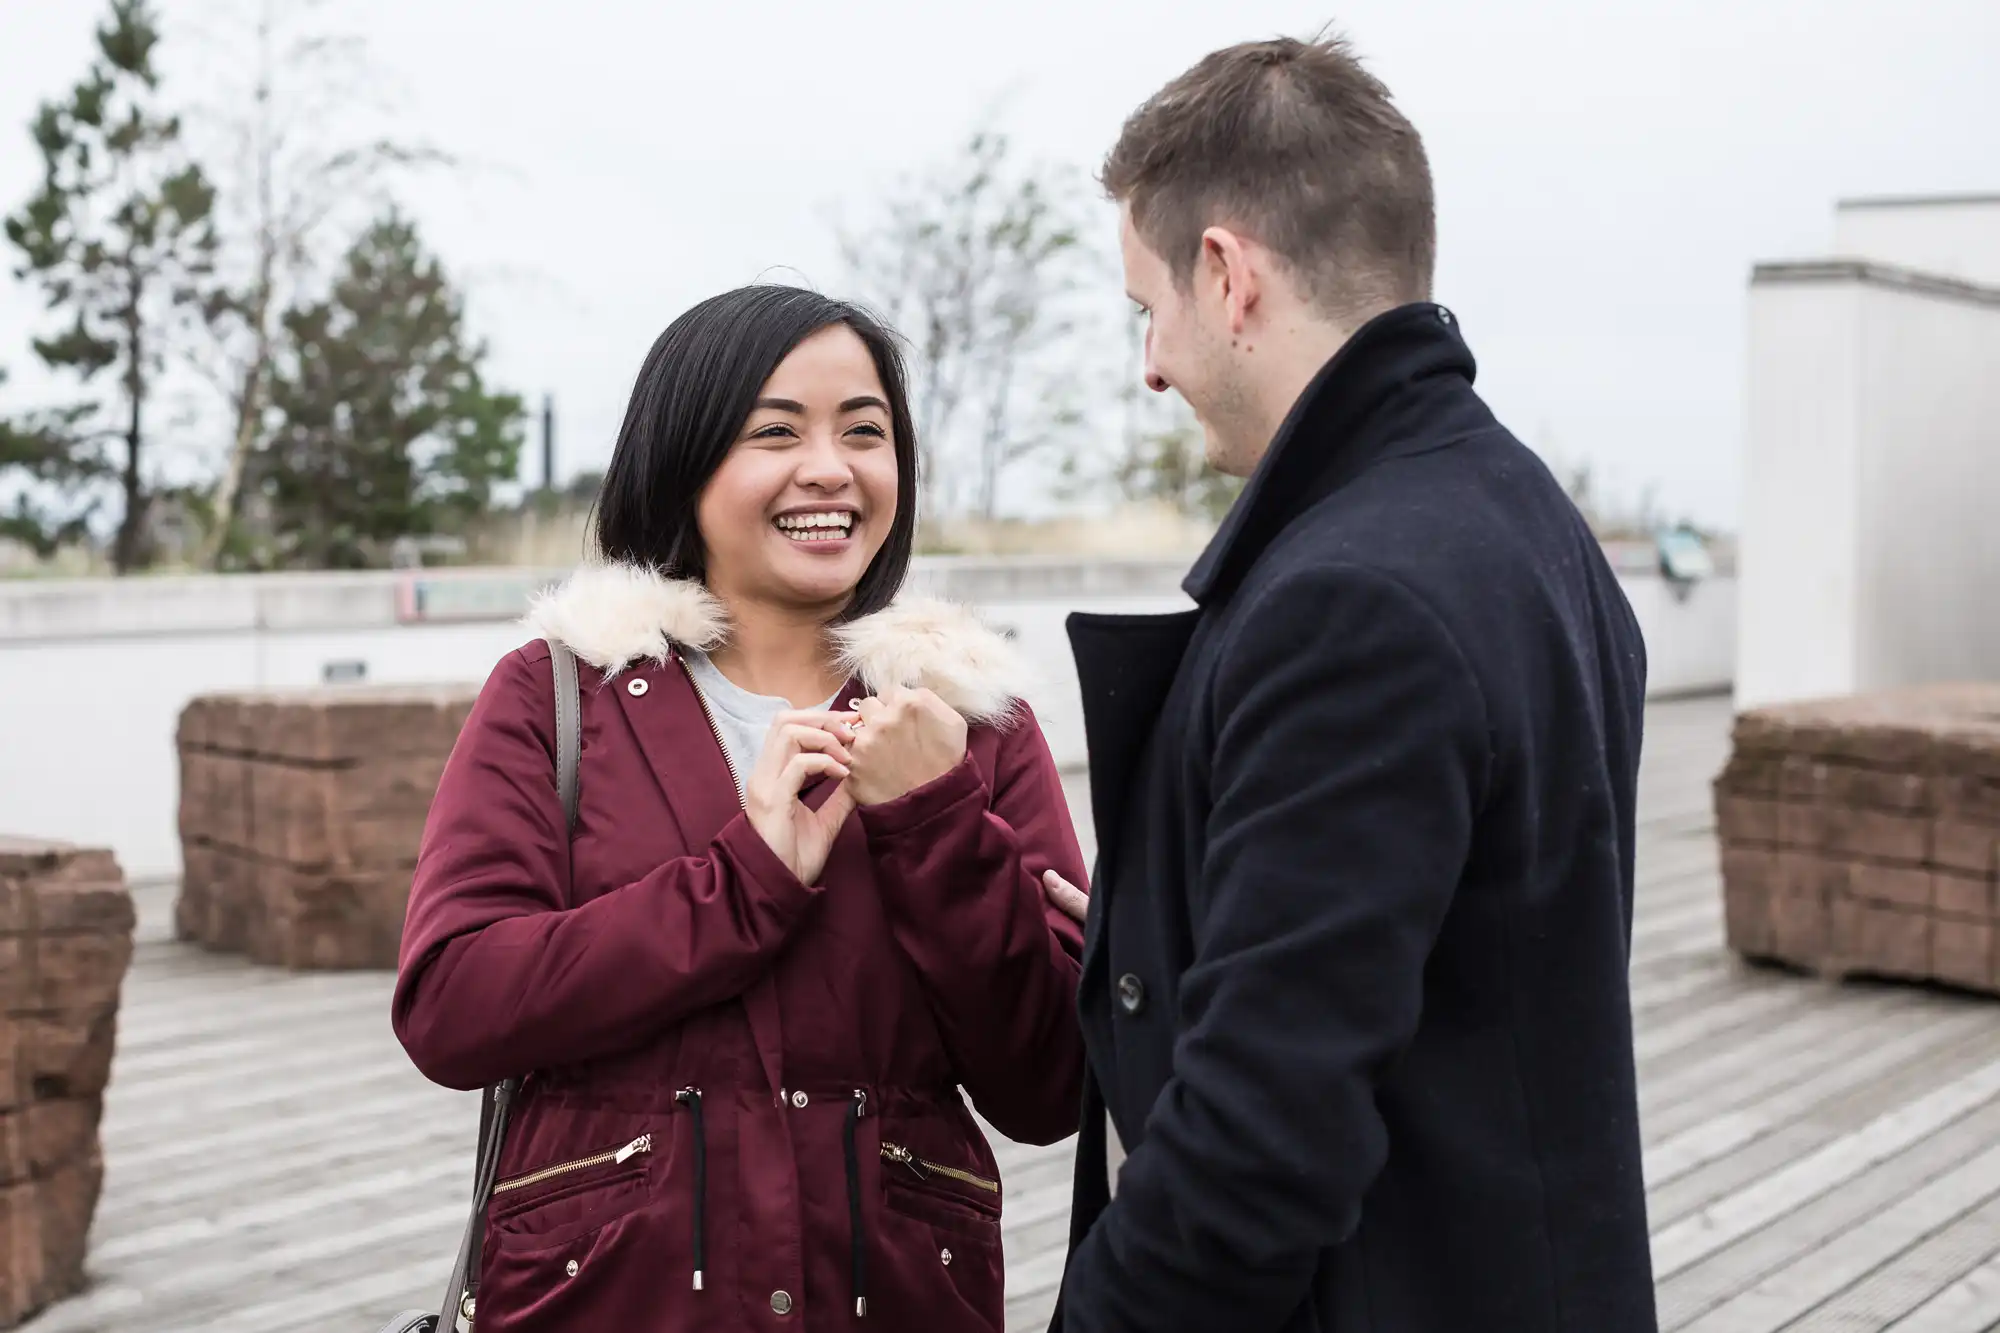 A smiling asian woman in a burgundy jacket talks with a caucasian man in a dark coat on a rooftop.